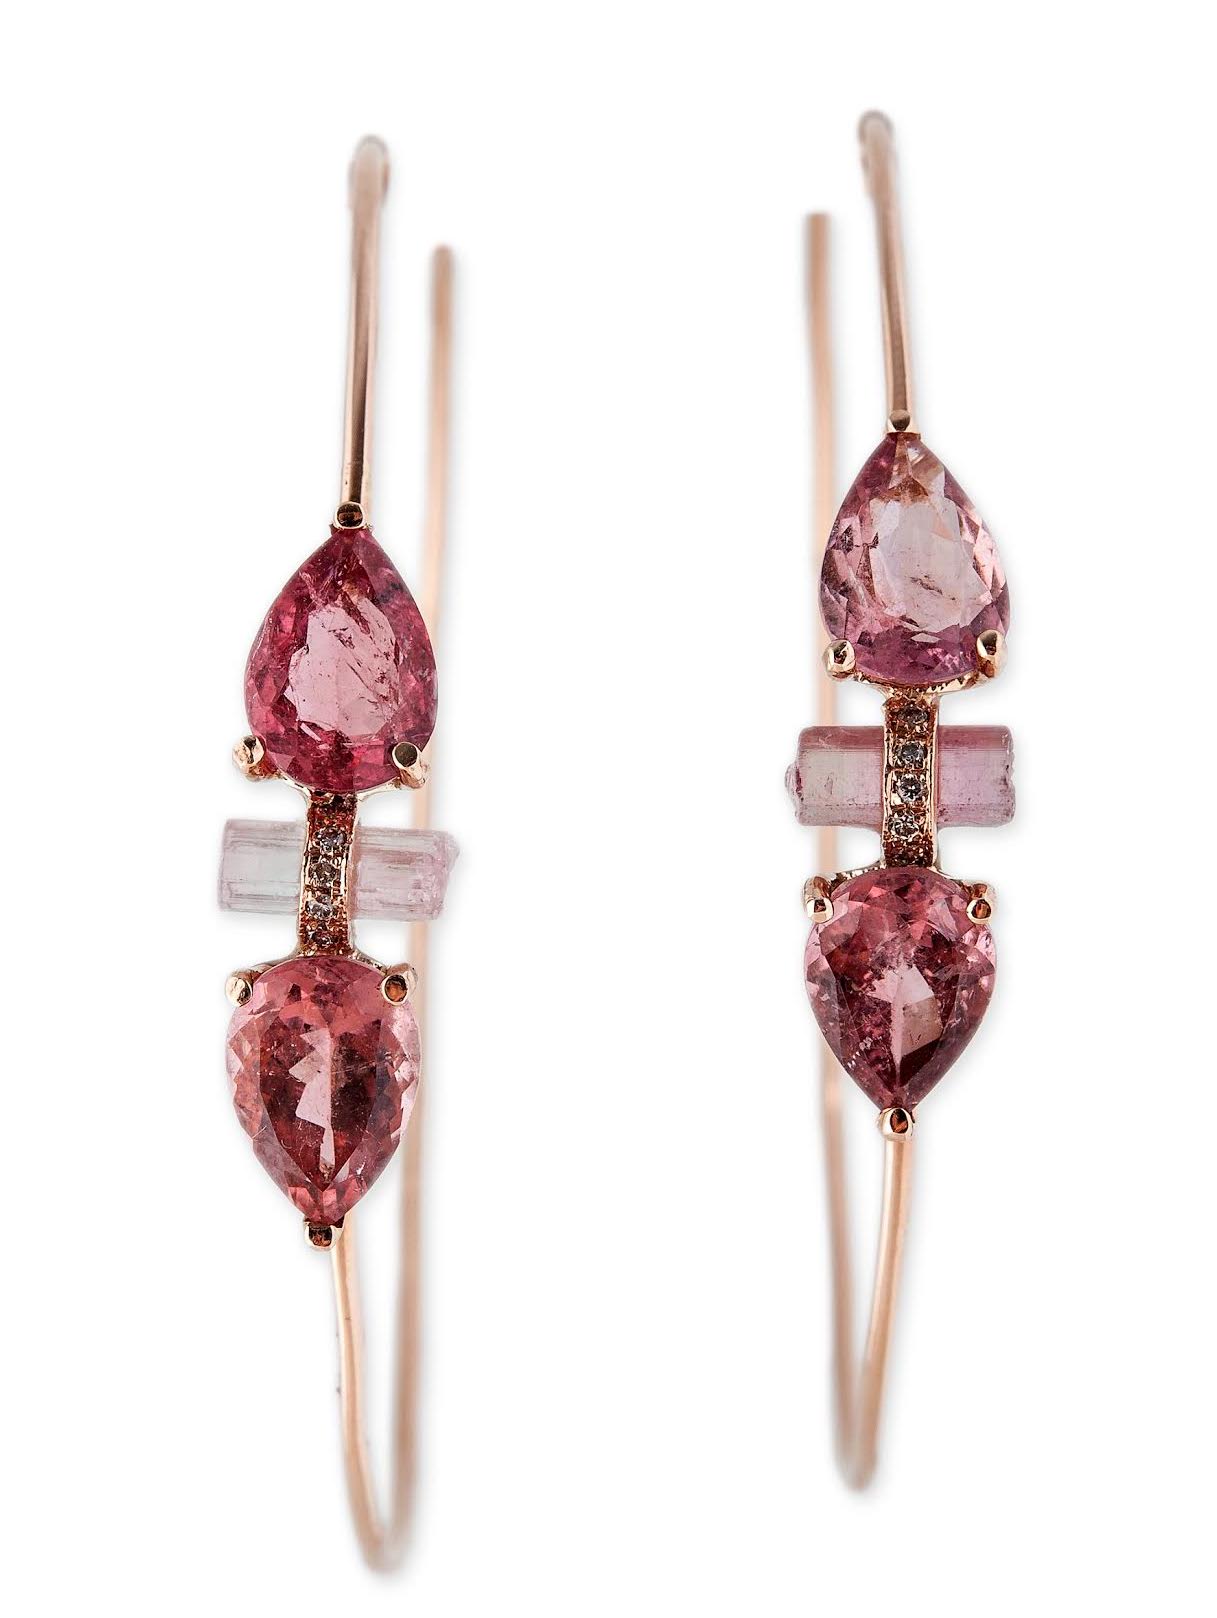 Jacquie Aiche double pyramid earrings | JCK On Your Market